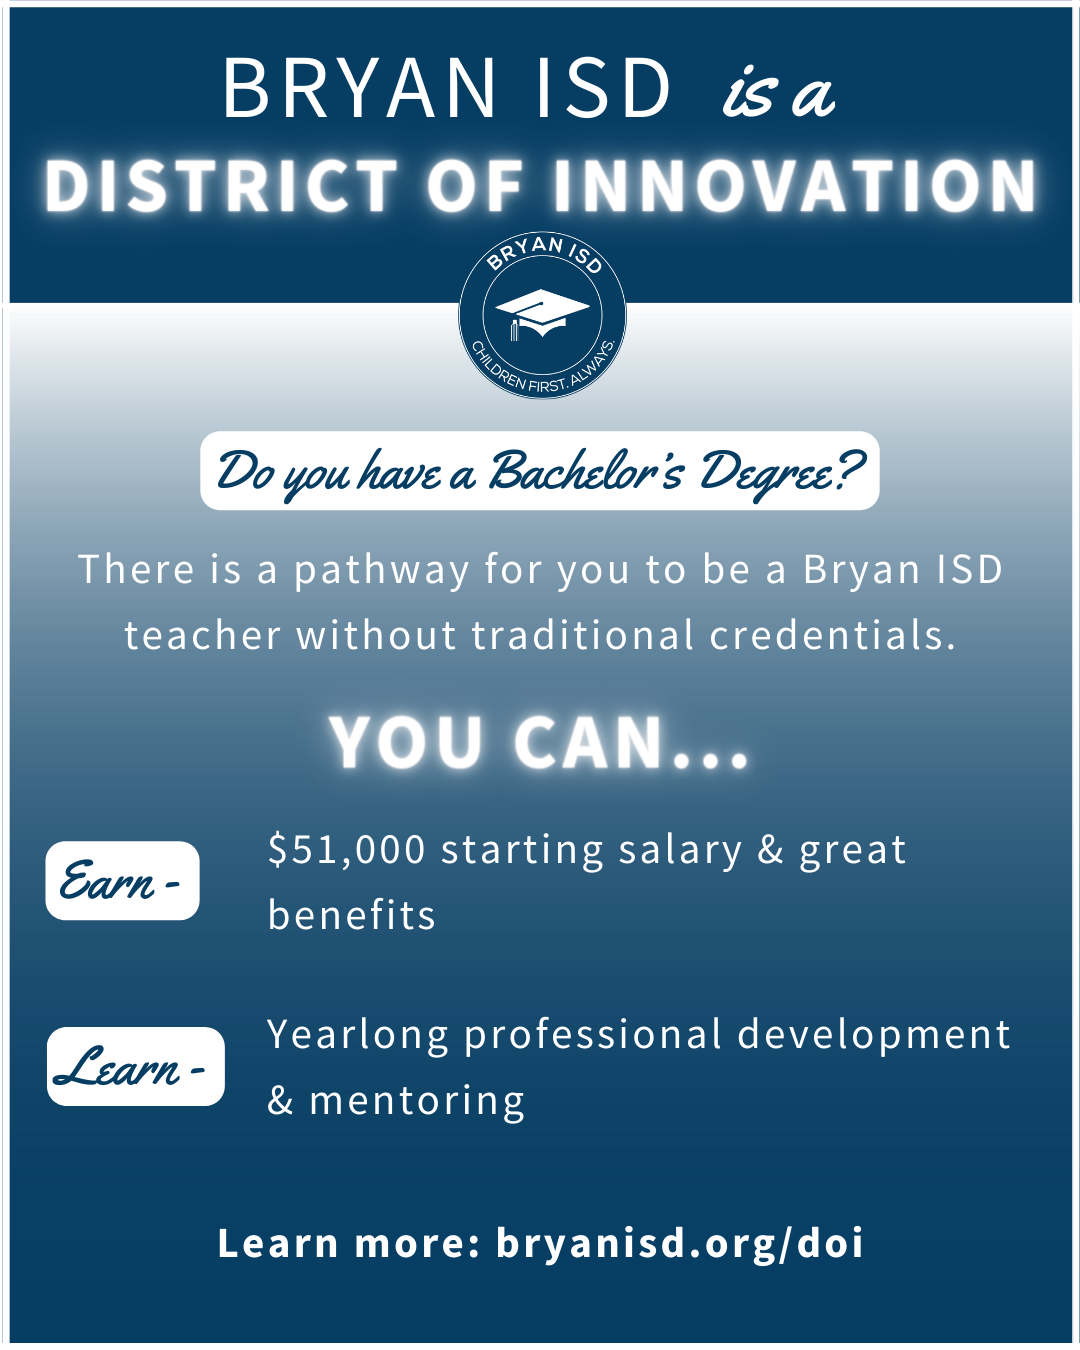 Bryan ISD Is a District of Innovation